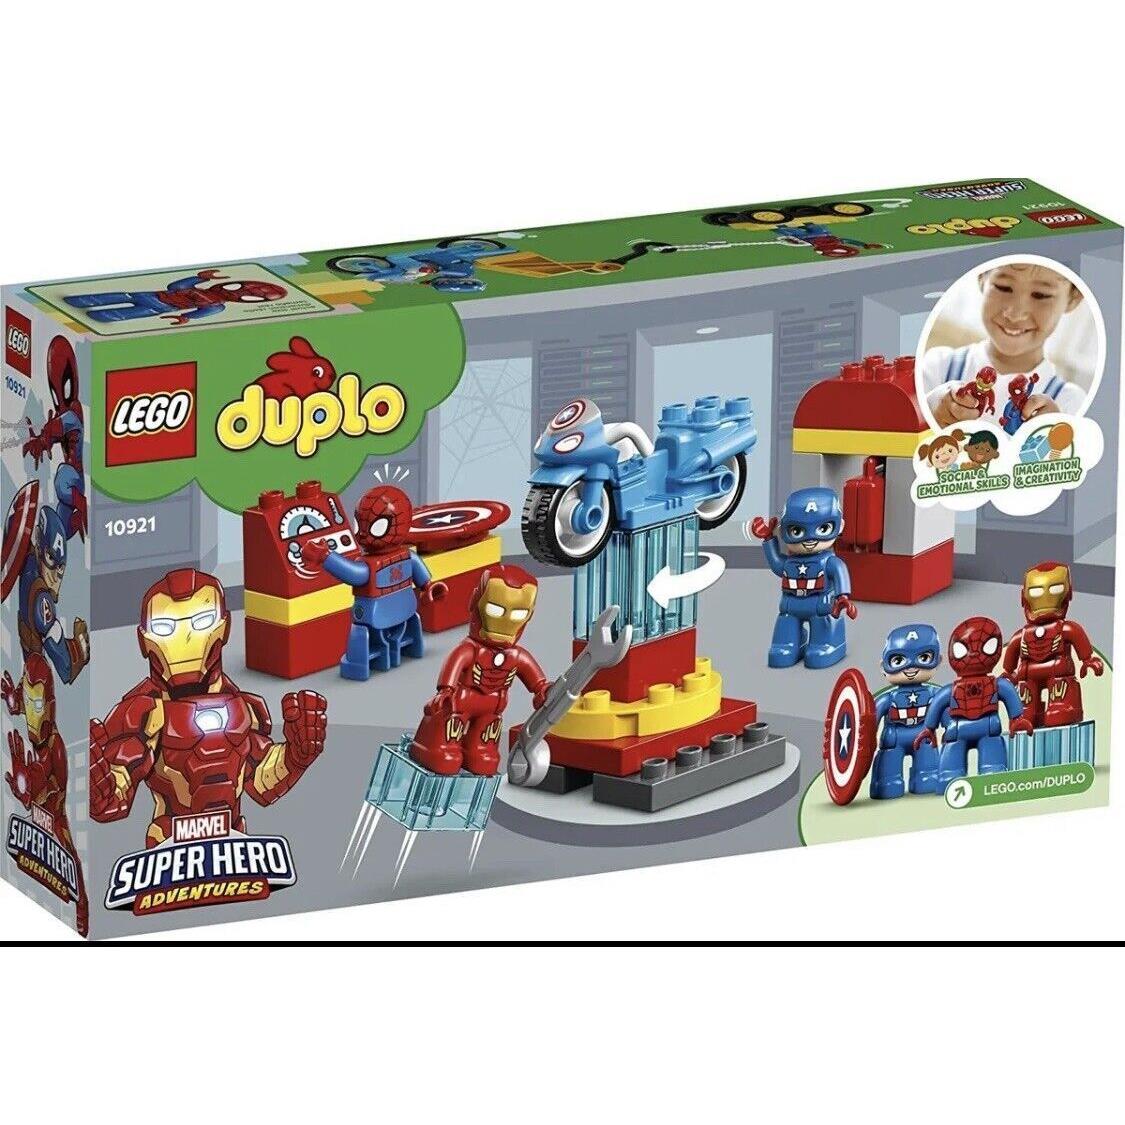 Lego Sets: Various Years Themes Pieces - New/ You Pick 10921 Duplo: 2020 Super Heroes Lab (30 pcs)